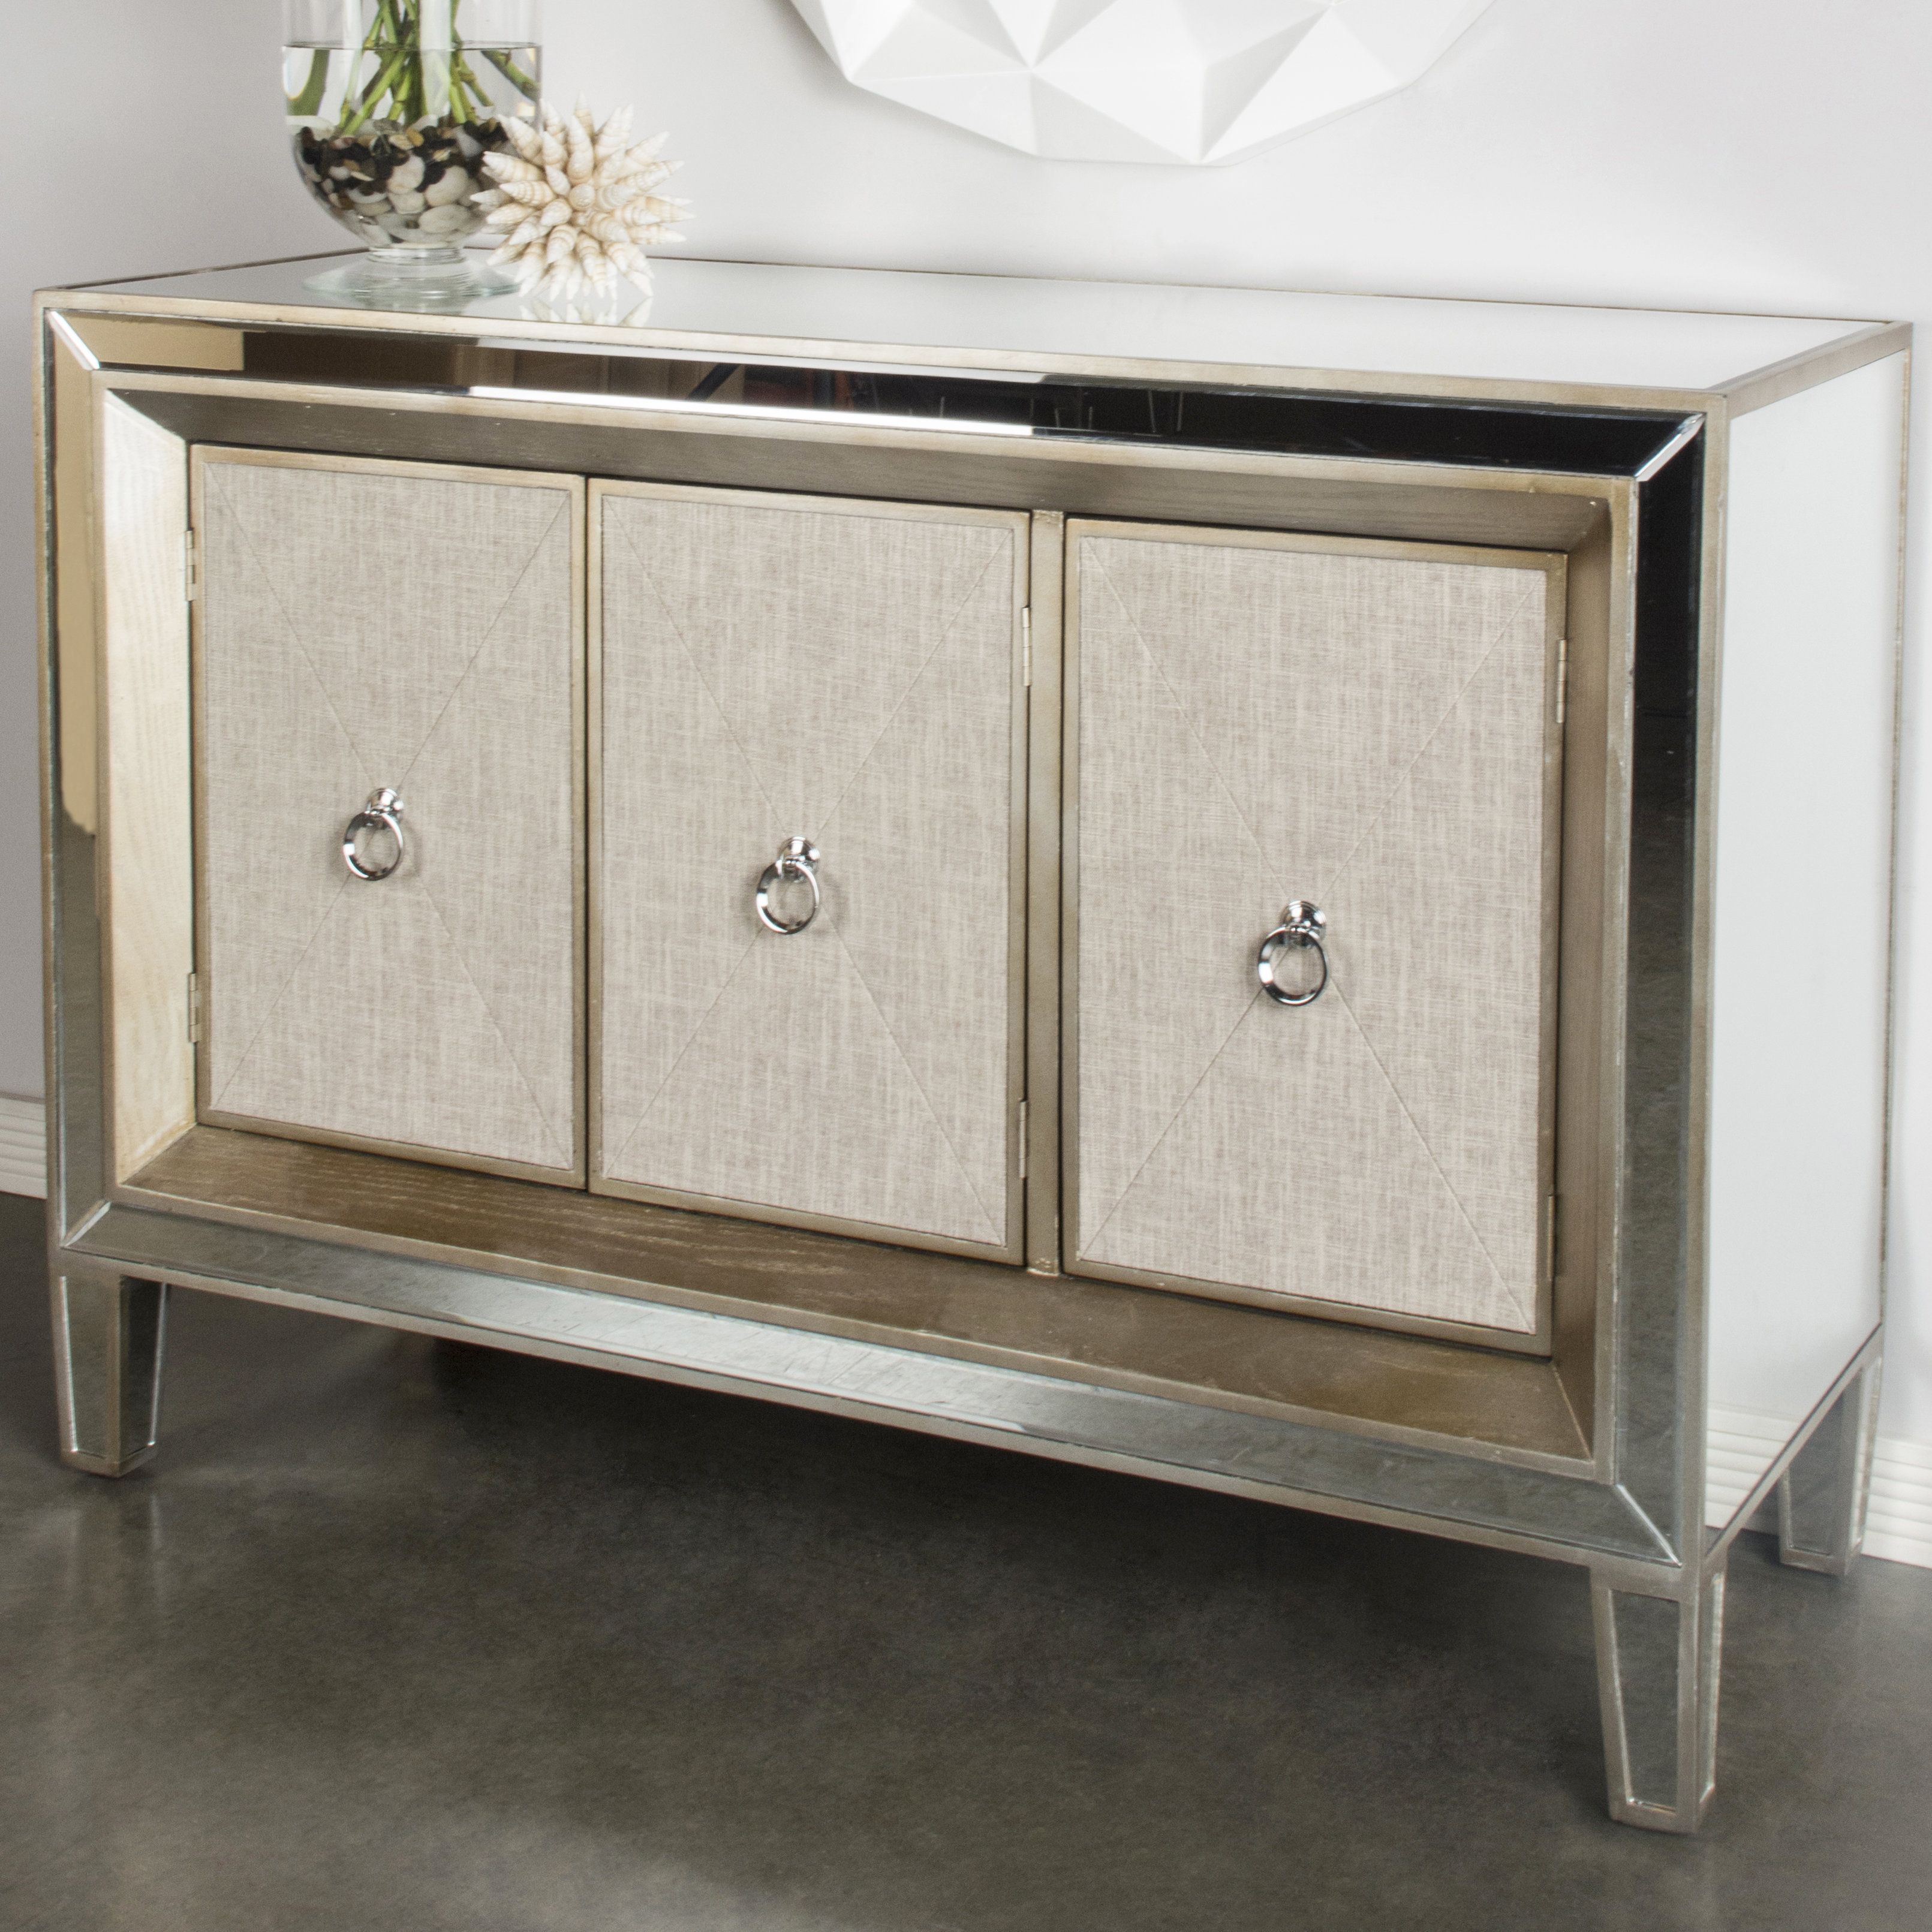 Gold & Silver Sideboards & Buffets You'll Love In 2019 | Wayfair For Most Popular Armelle Sideboards (View 18 of 20)